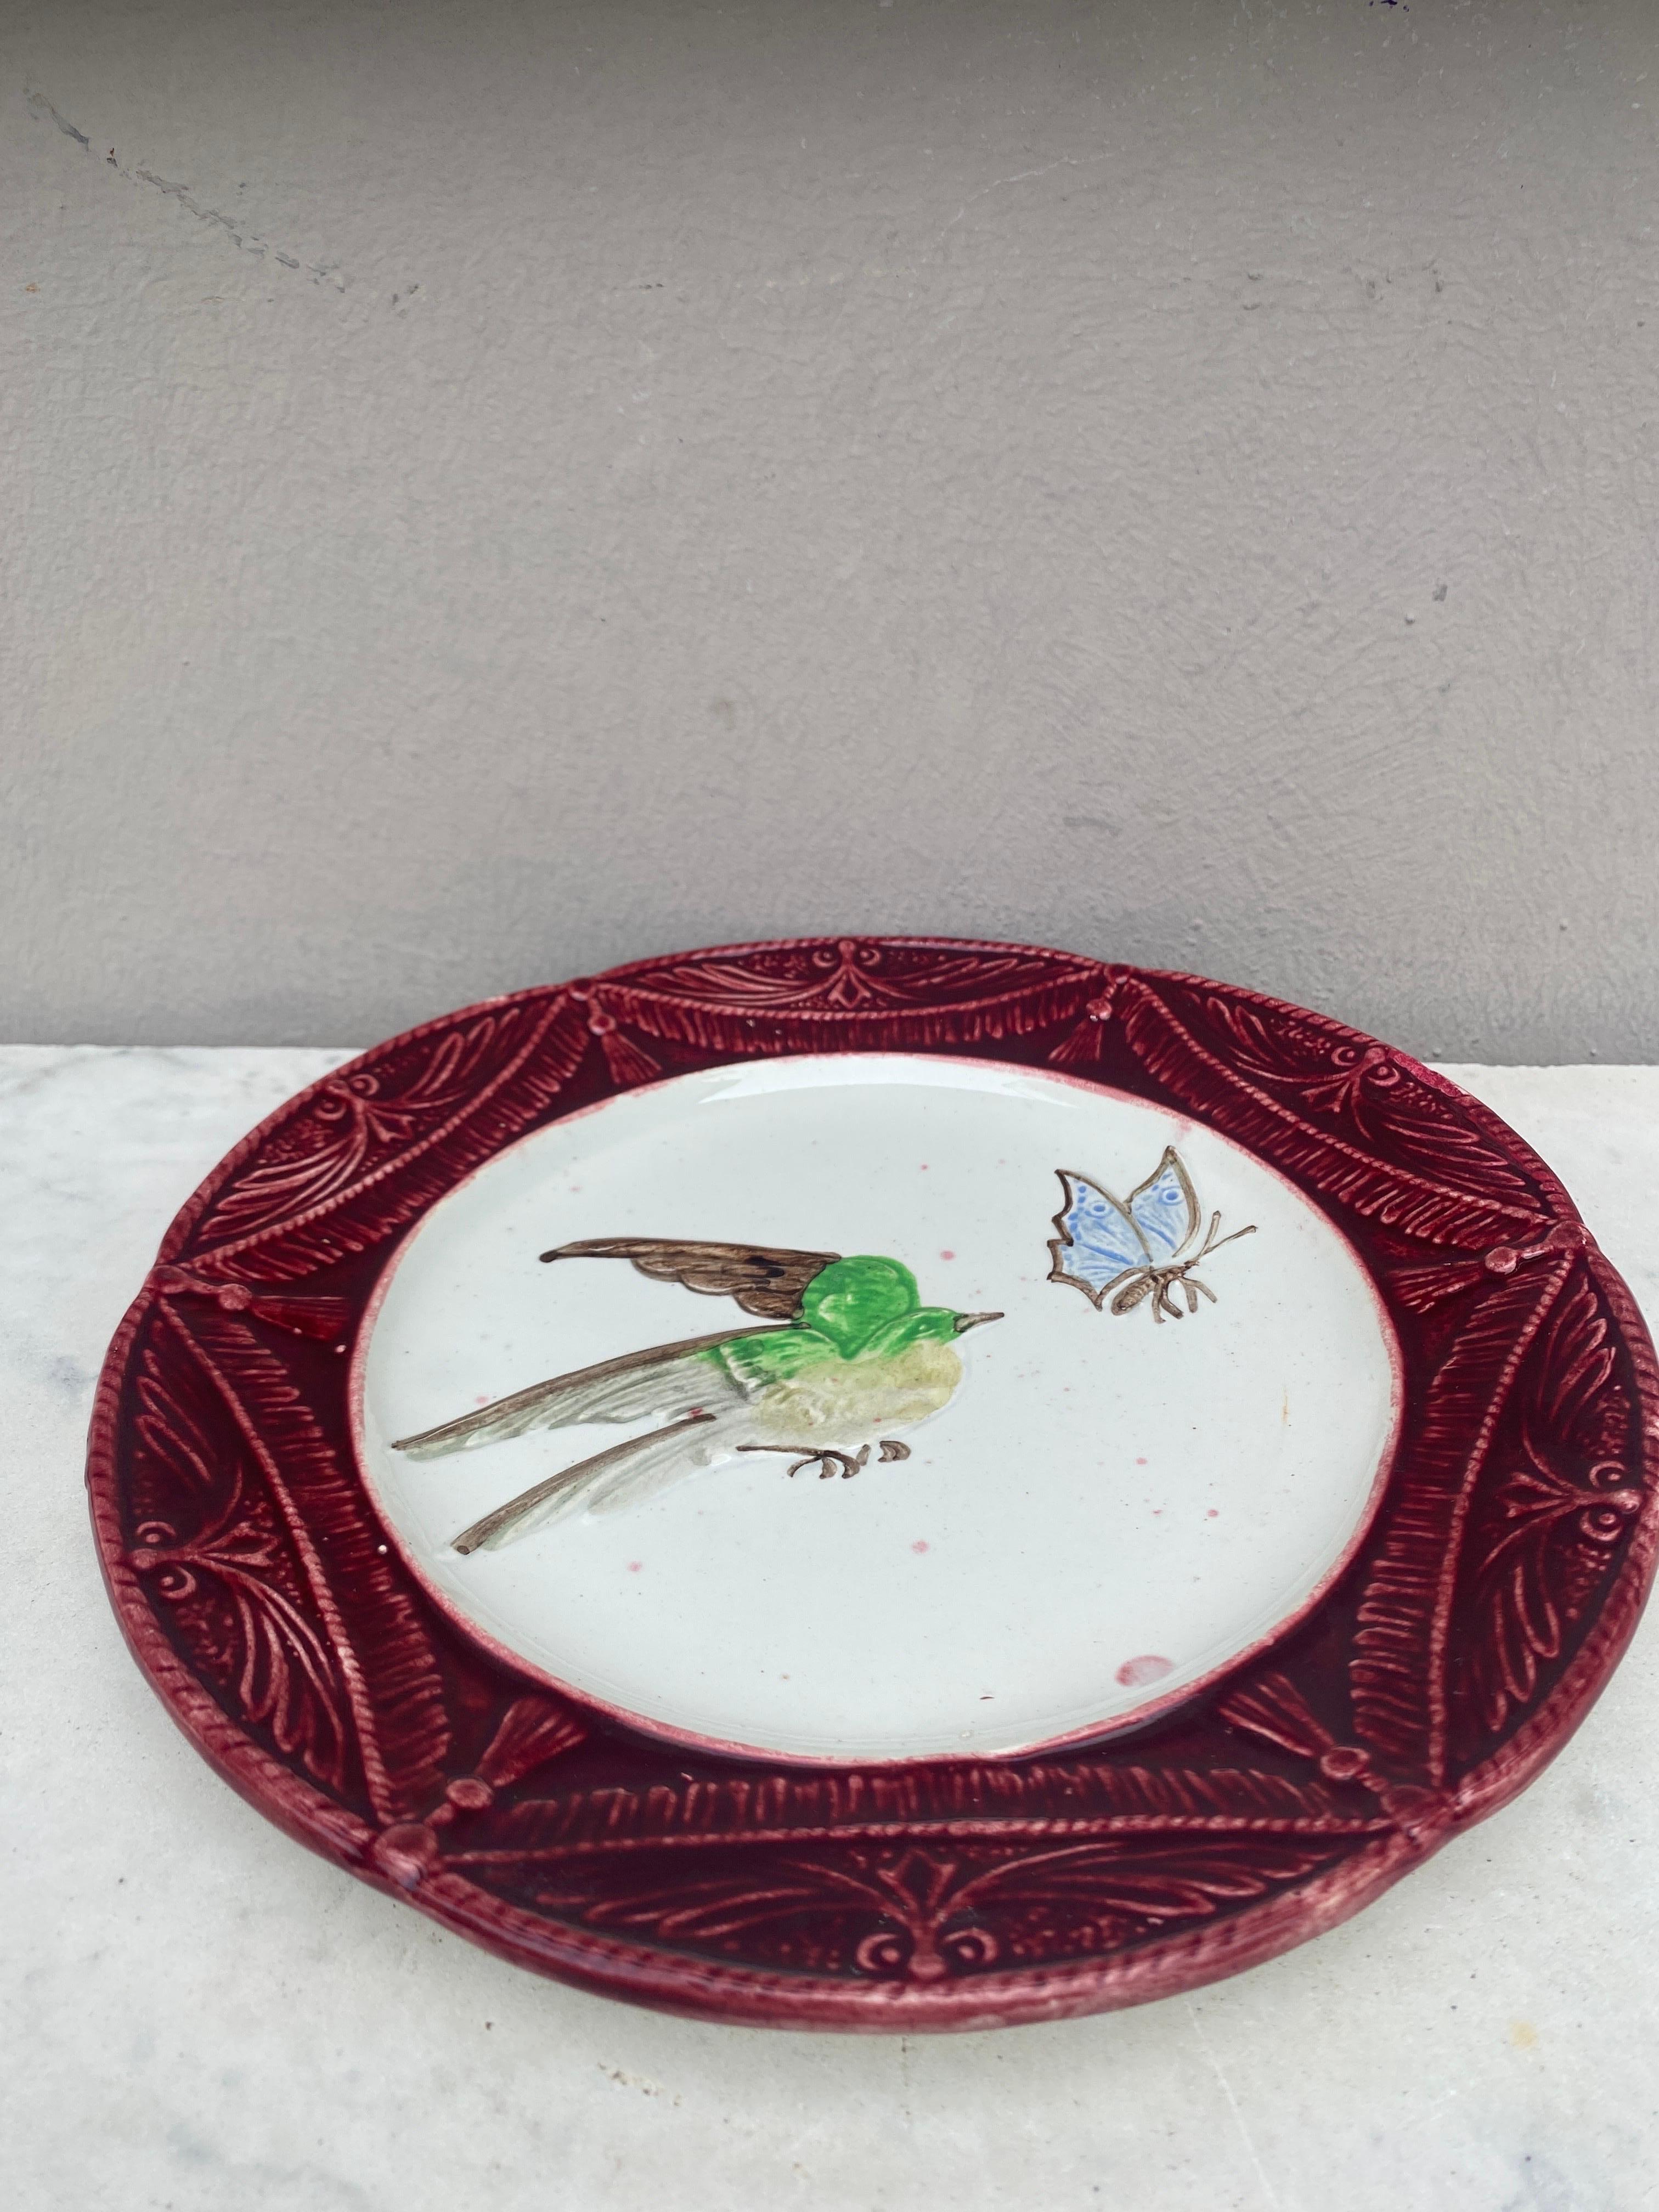 French bird Plate signed Moulin des Loups Hamage Orchies Circa 1900.
